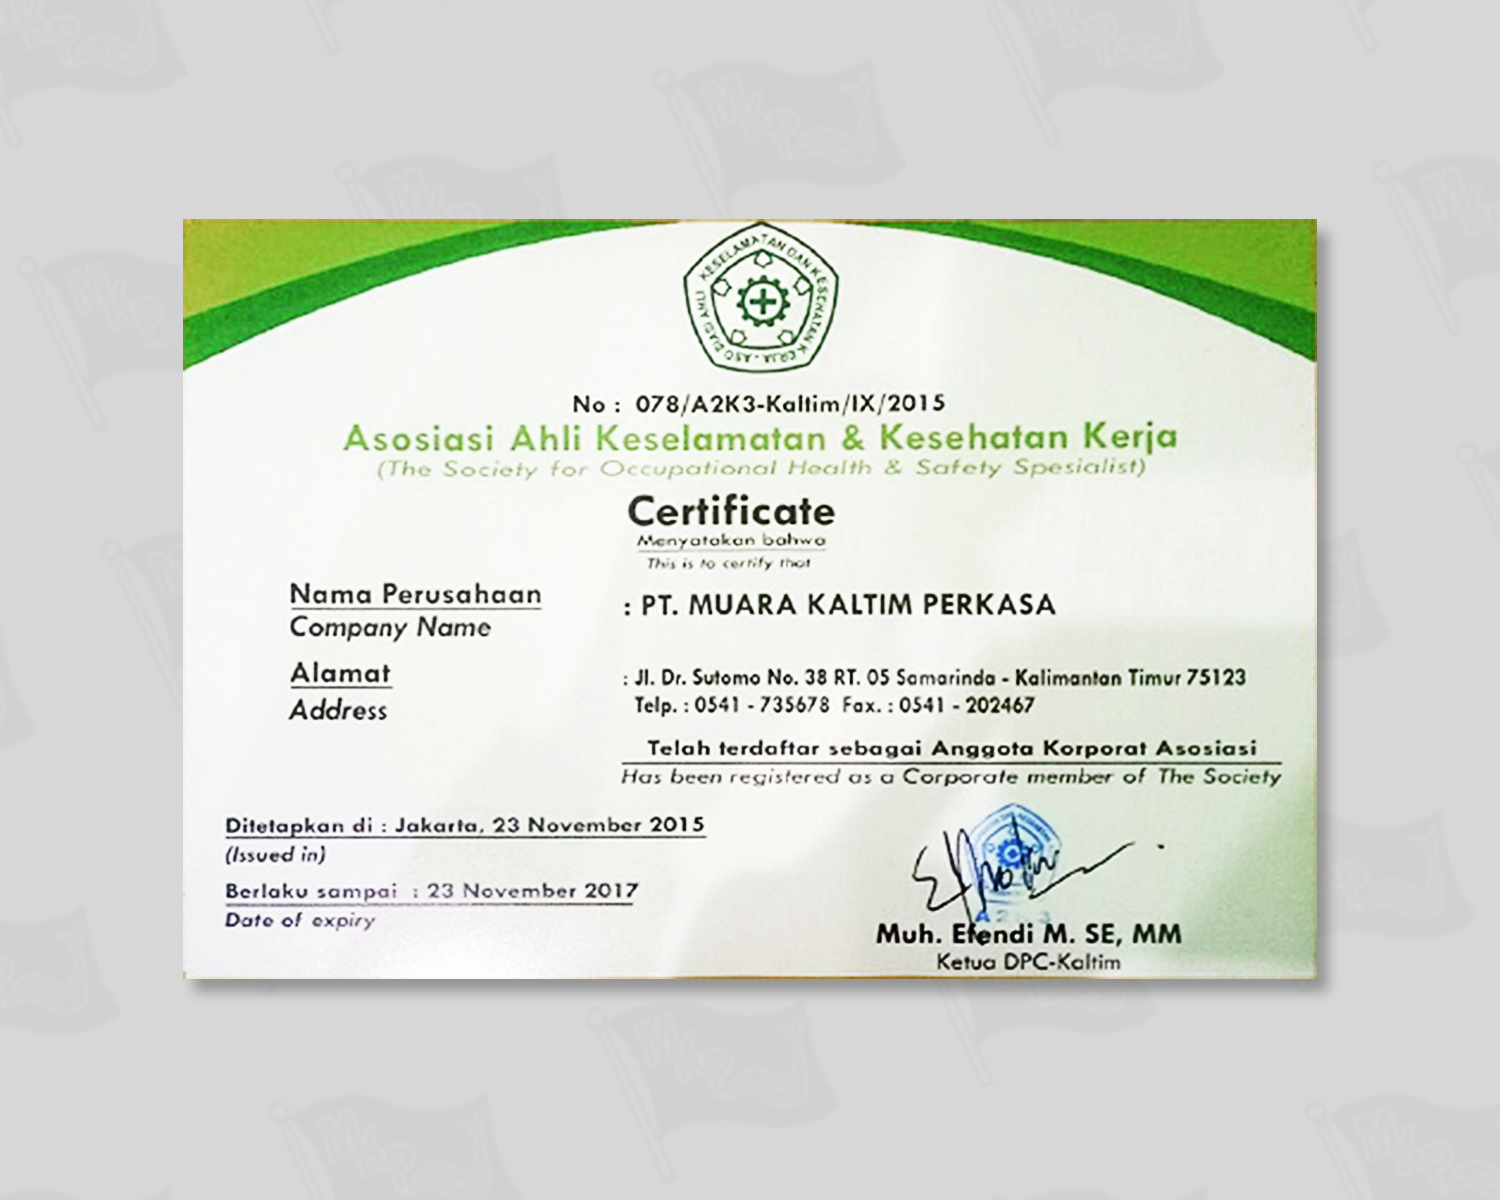 Society for Occupational Health and Safety Specialist Certificate